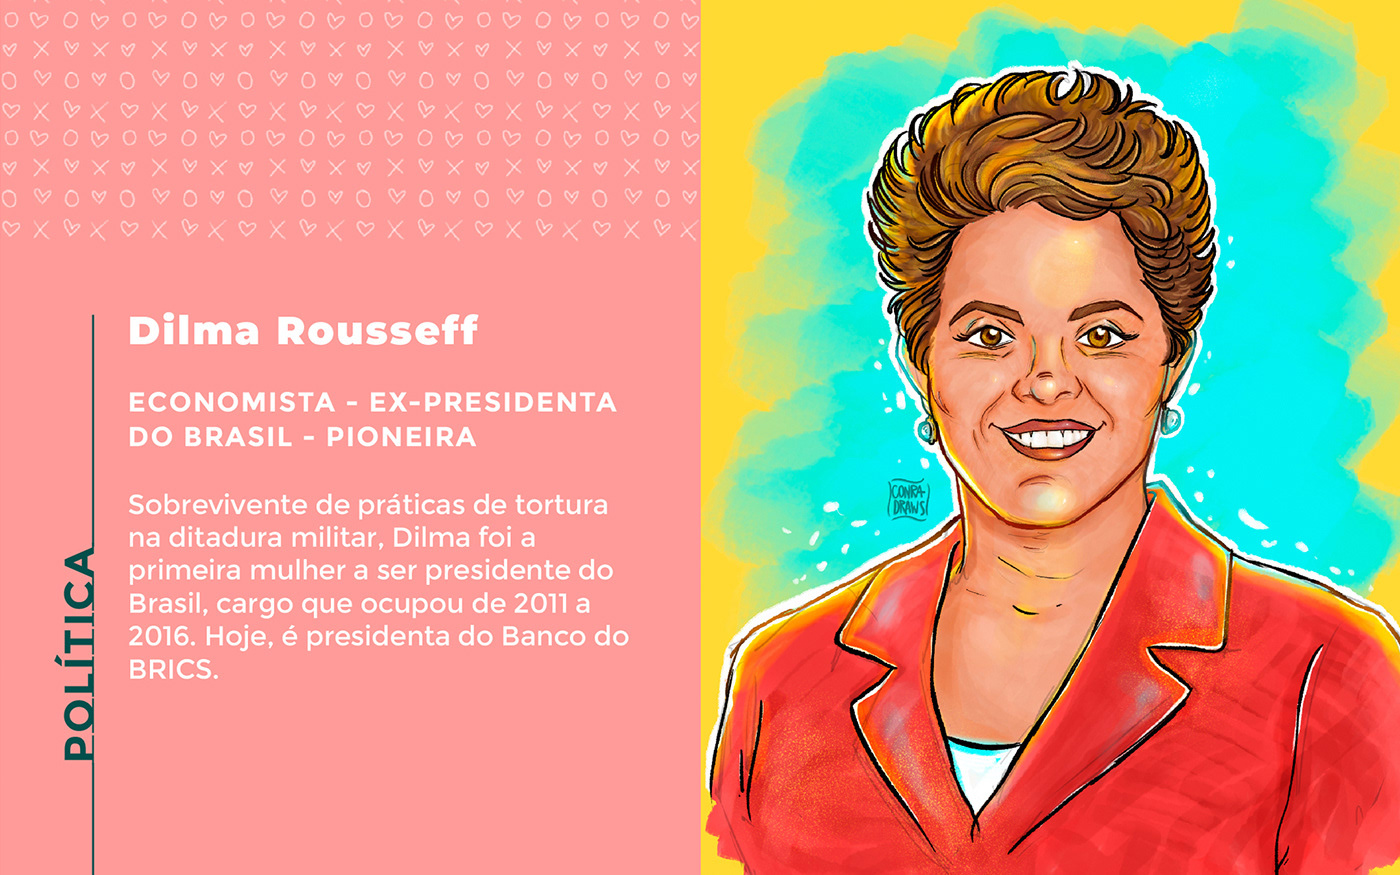 An illustrated portrait of Dilma Rousseff   the first brazilian woman president